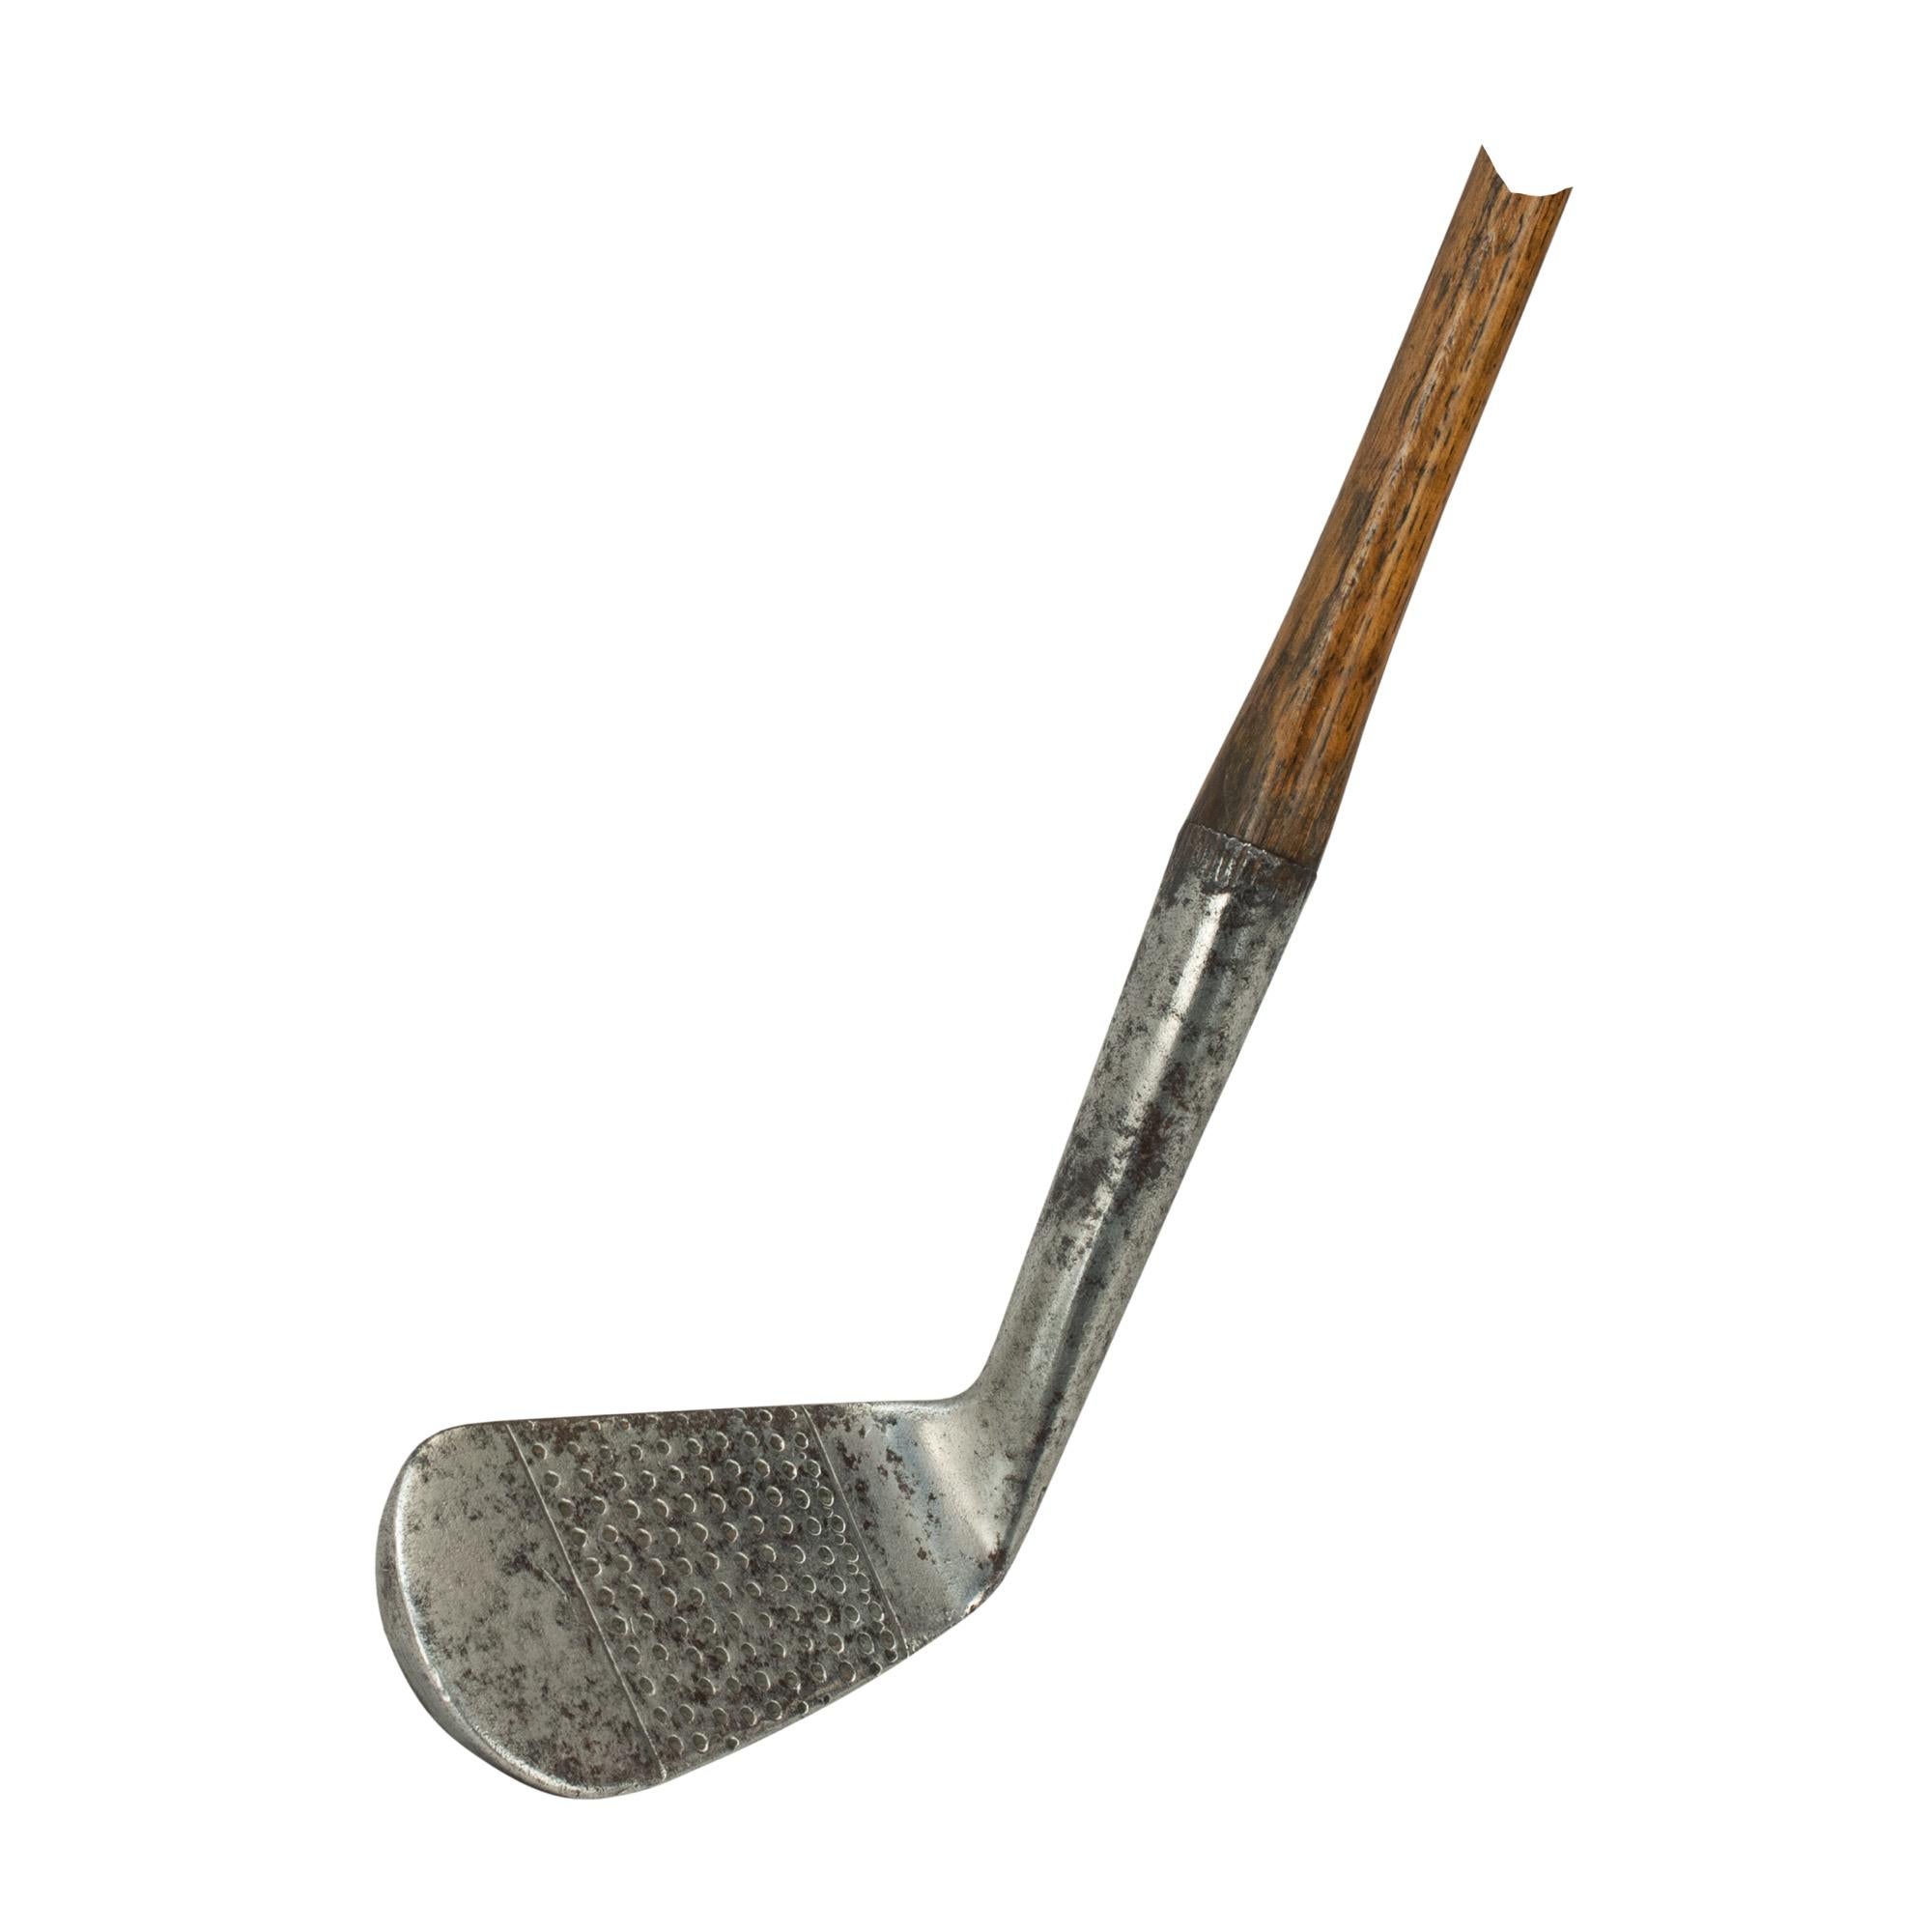 Antique Hickory Golf Club, Tom Stewart Iron with Personal Inspection Mark 6